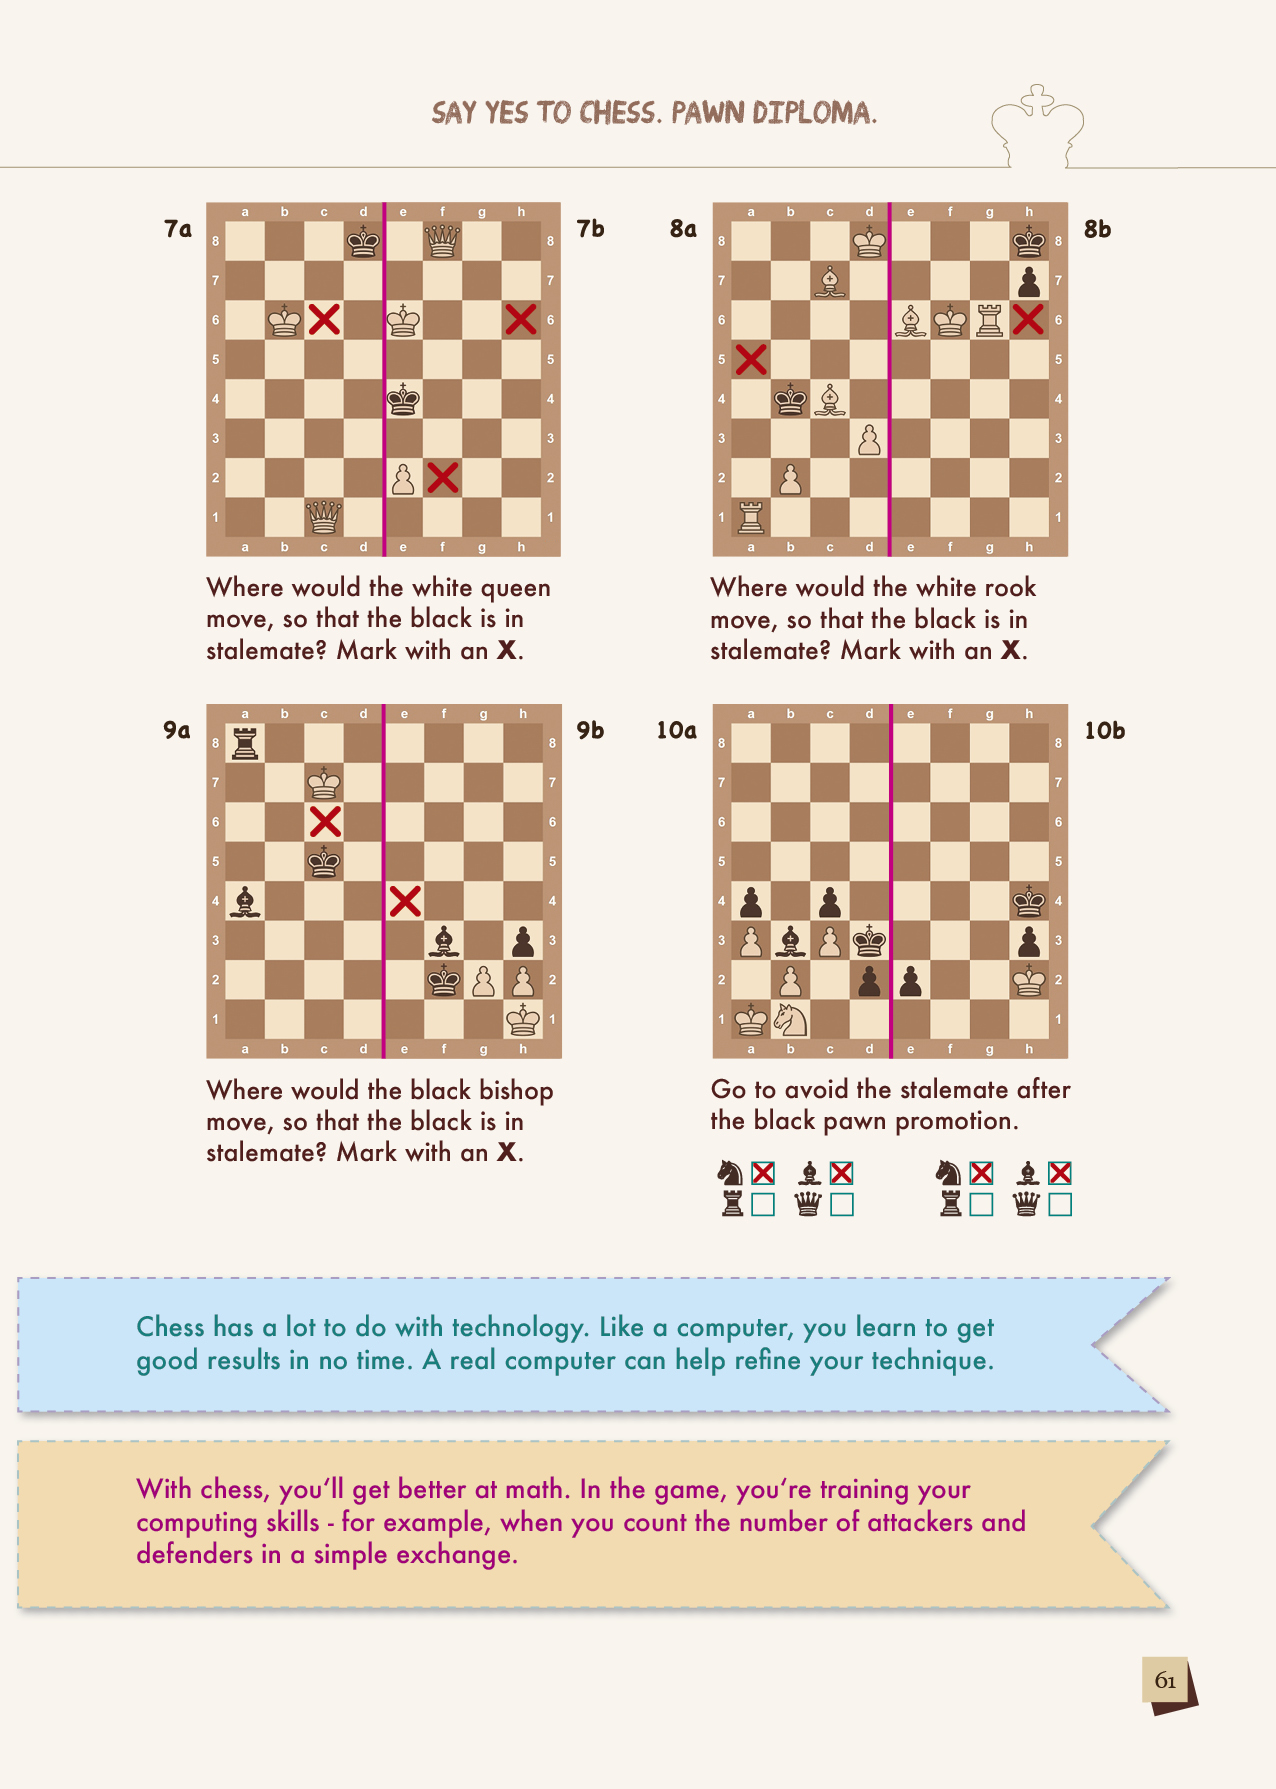 sayyes2chess_solutions_page_61.jpg